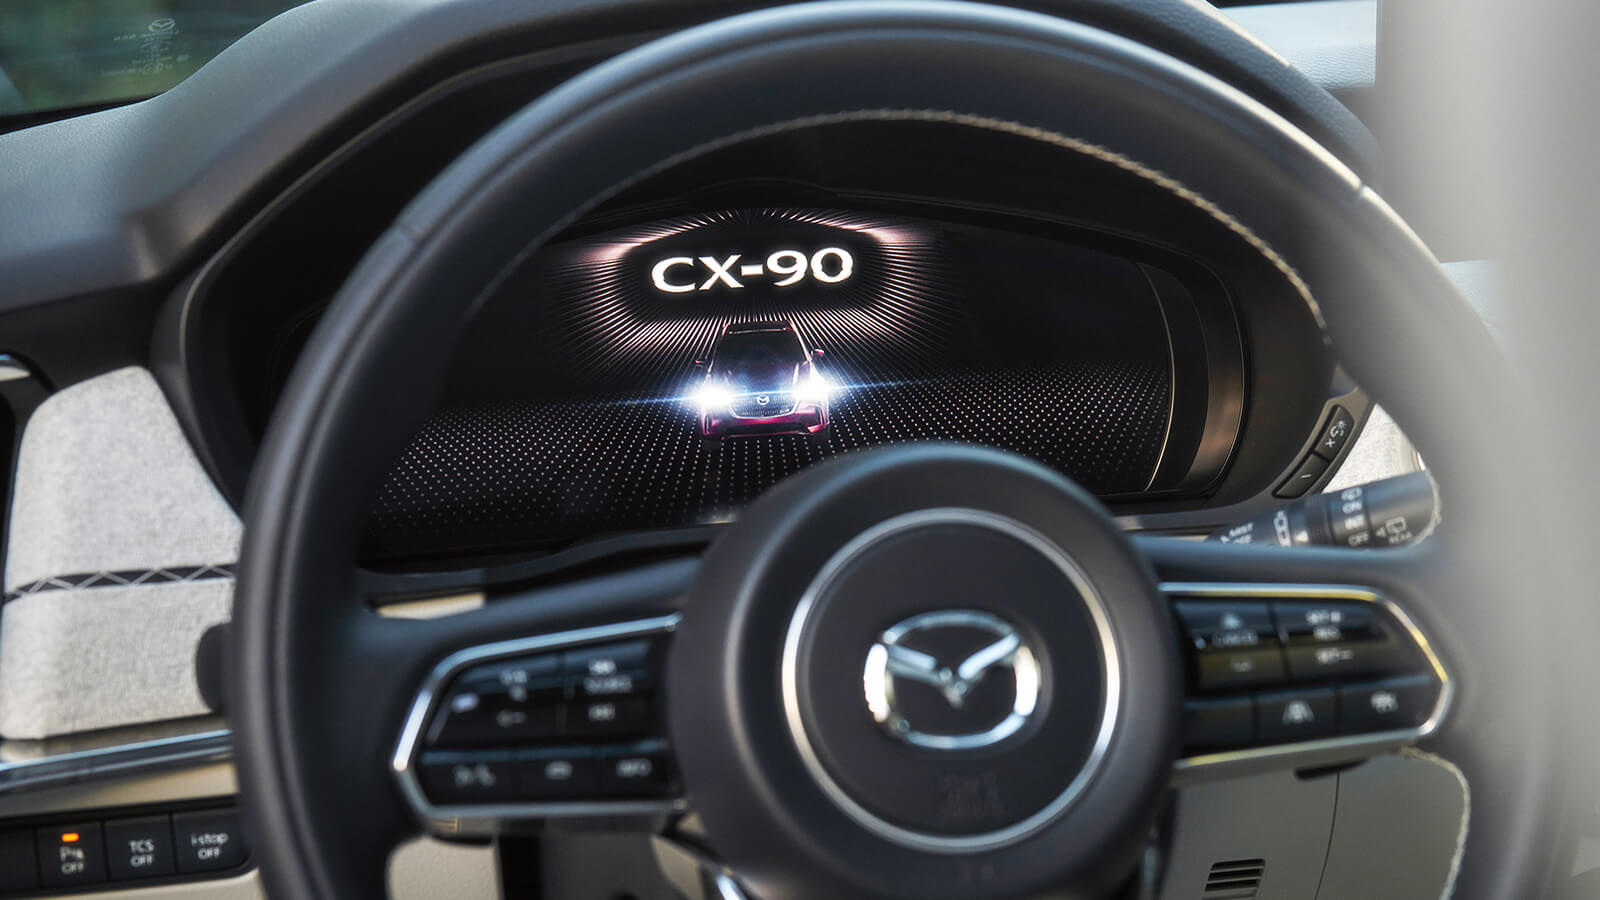 Closeup of display behind the wheel, CX-90 animates as the vehicle starts.  